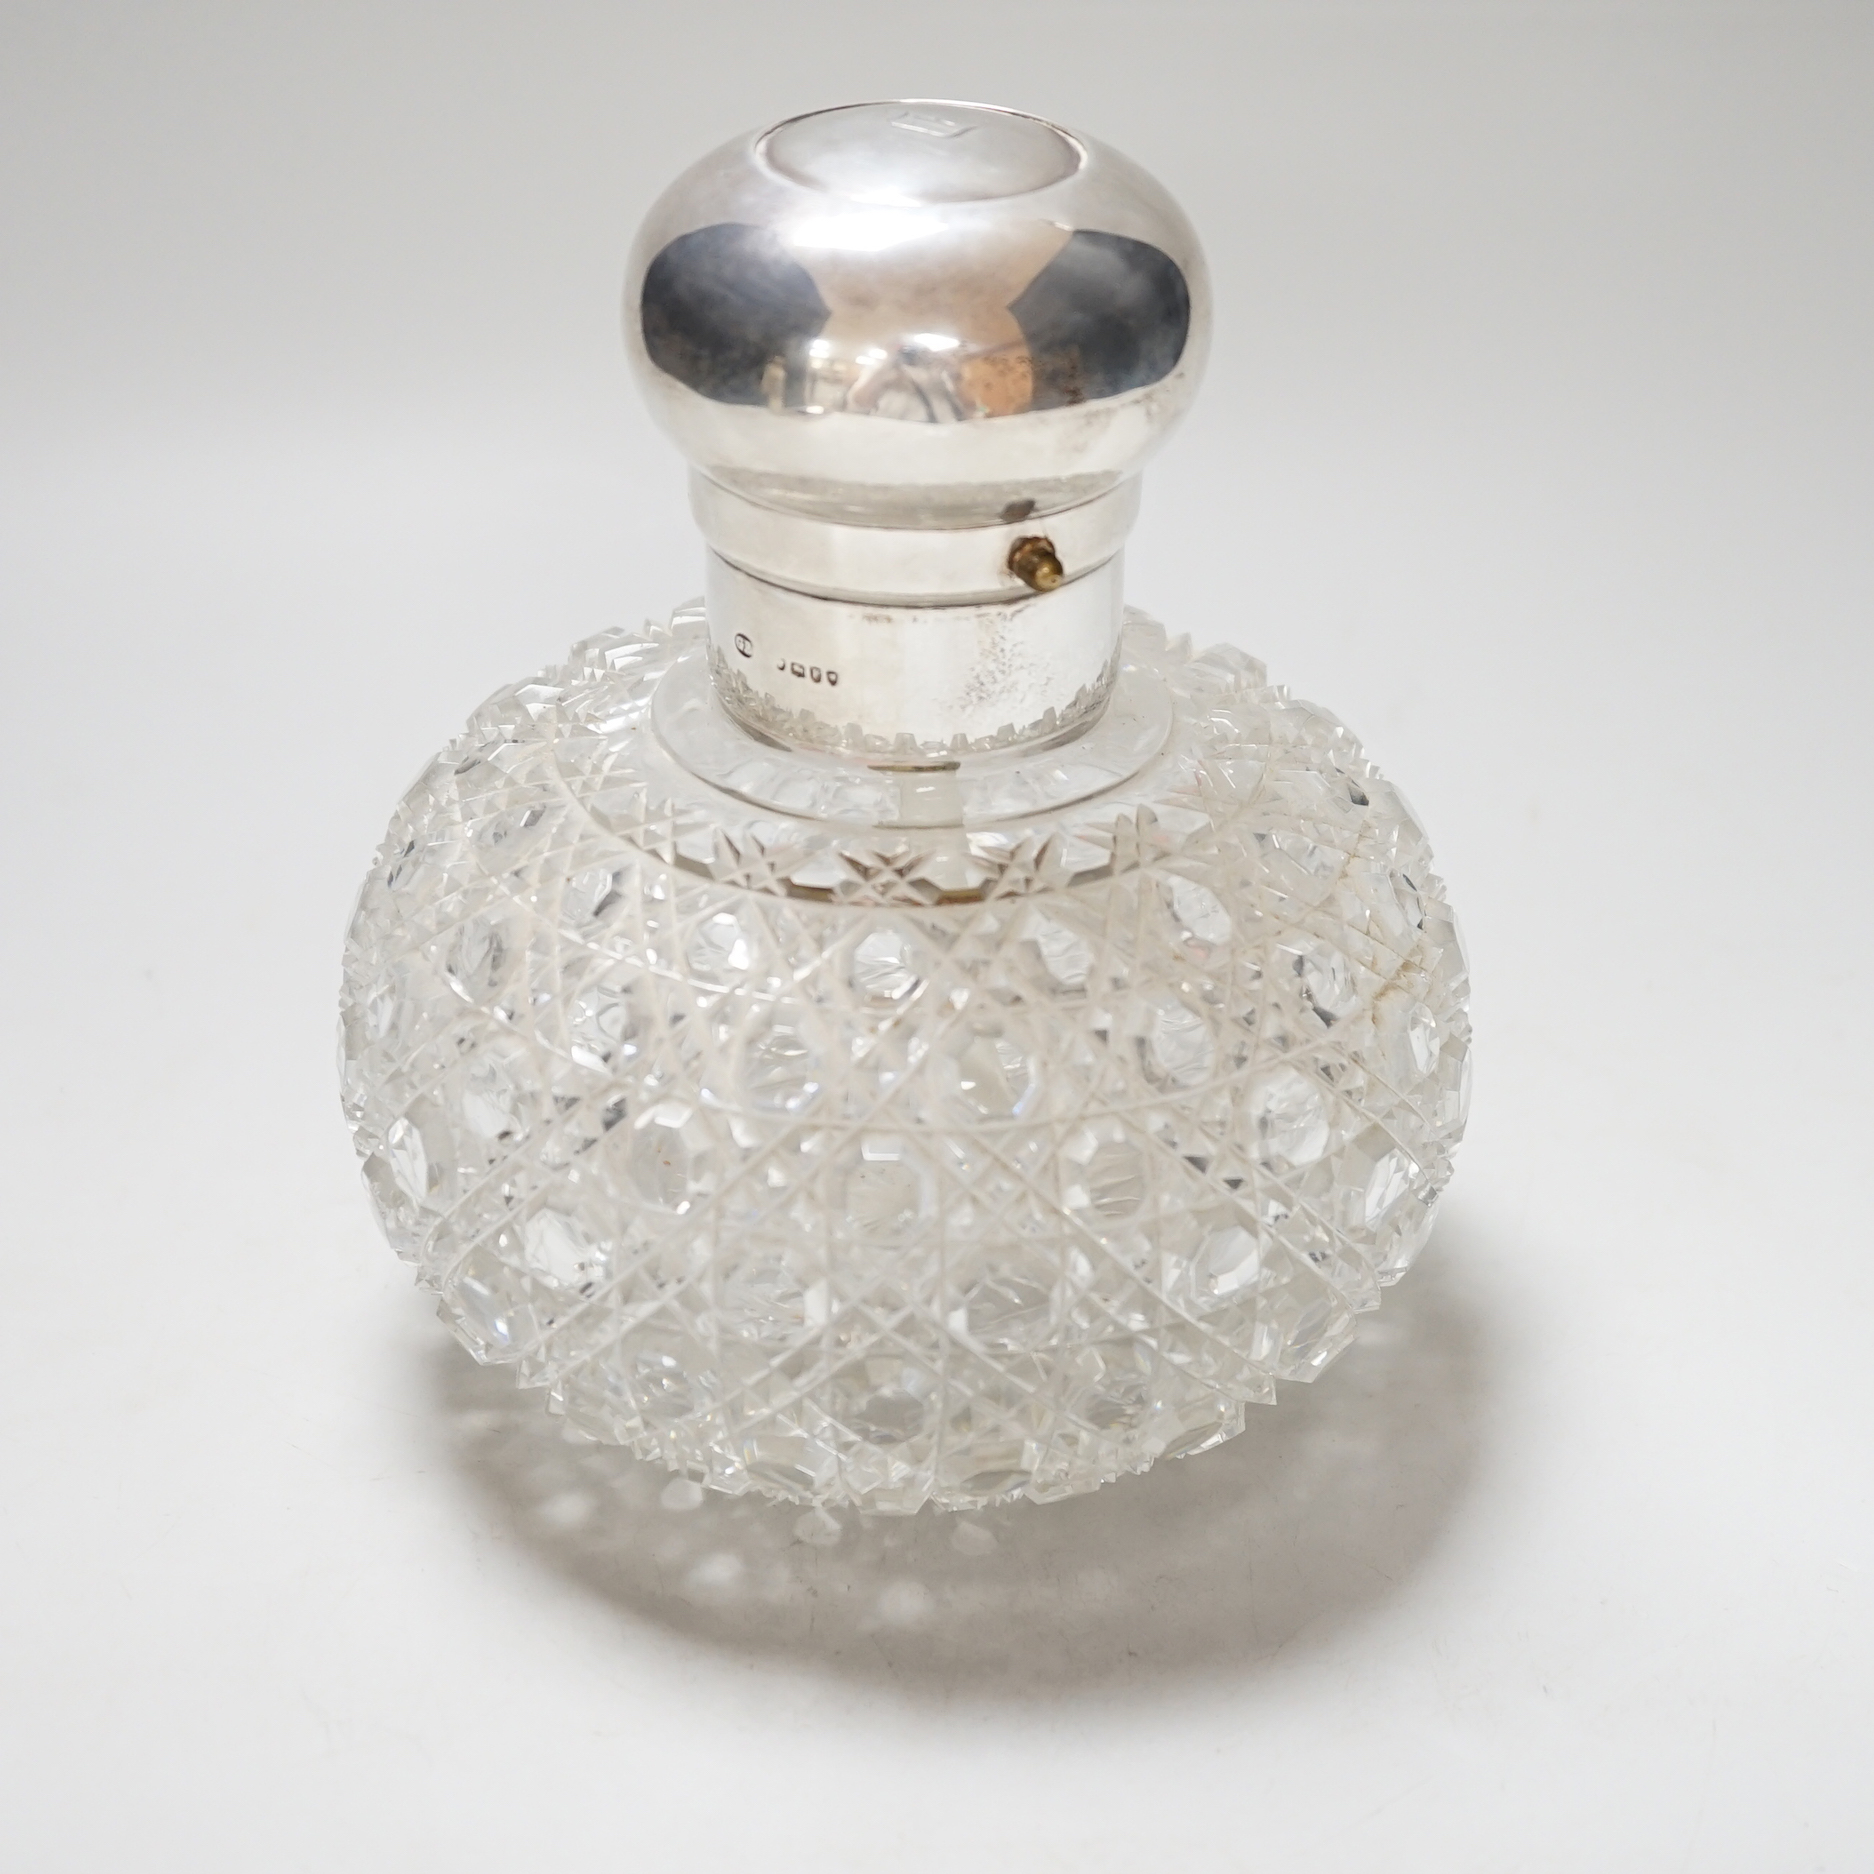 A large Victorian silver mounted globular cut glass atomiser, the lid with pump action button, the body with hobnail cutting, makers initials GB, London 1881, height 16.5cm